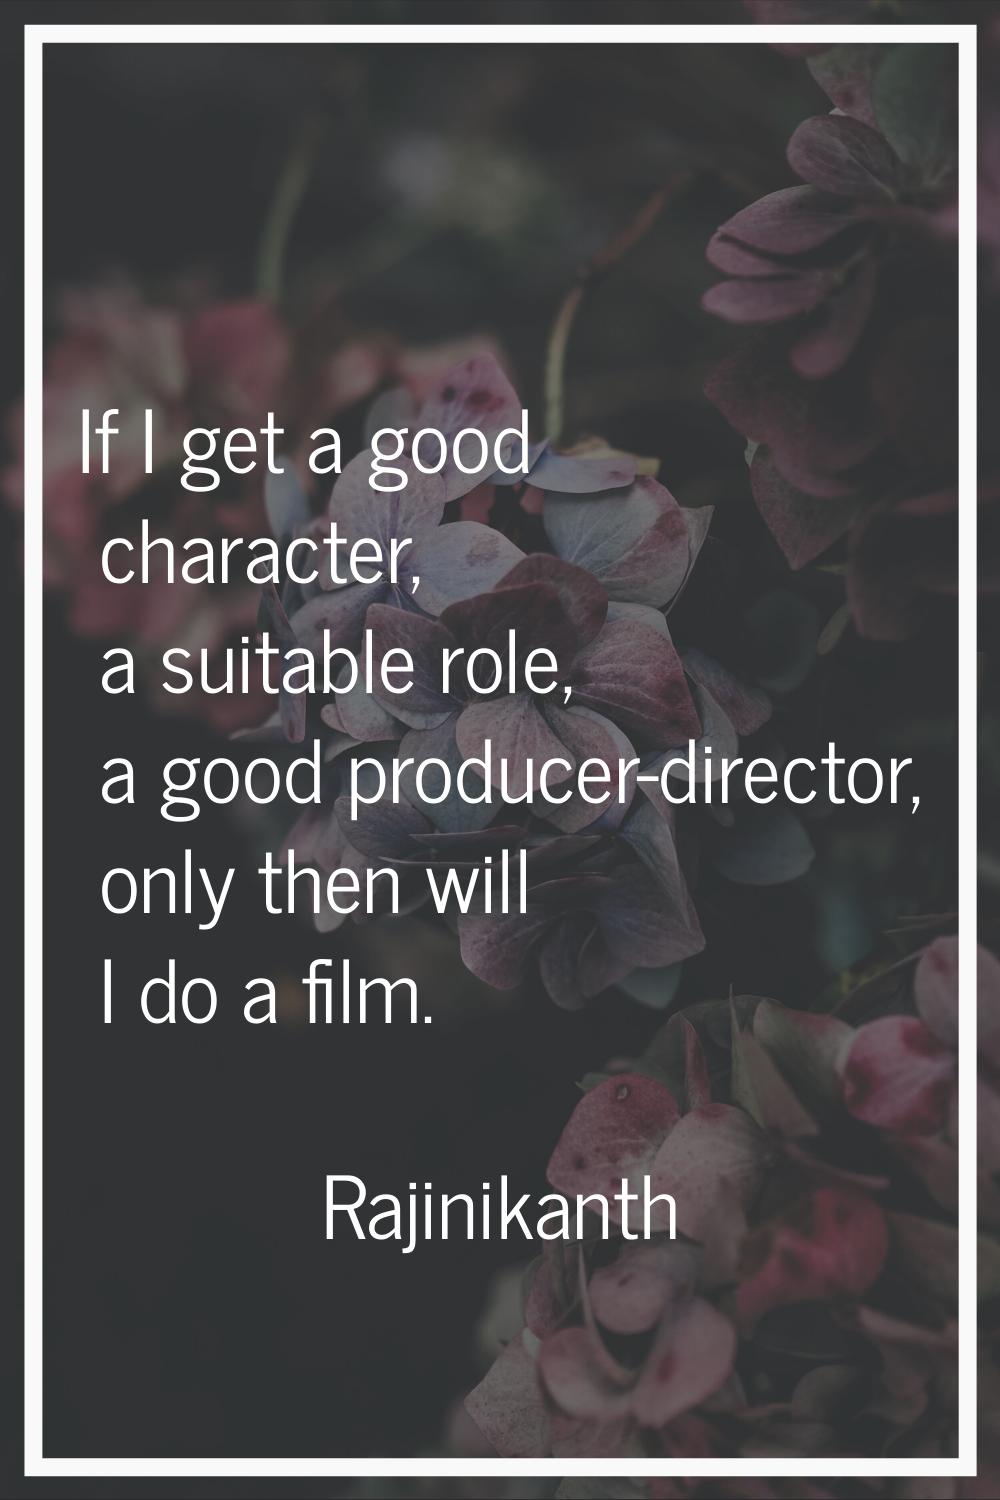 If I get a good character, a suitable role, a good producer-director, only then will I do a film.